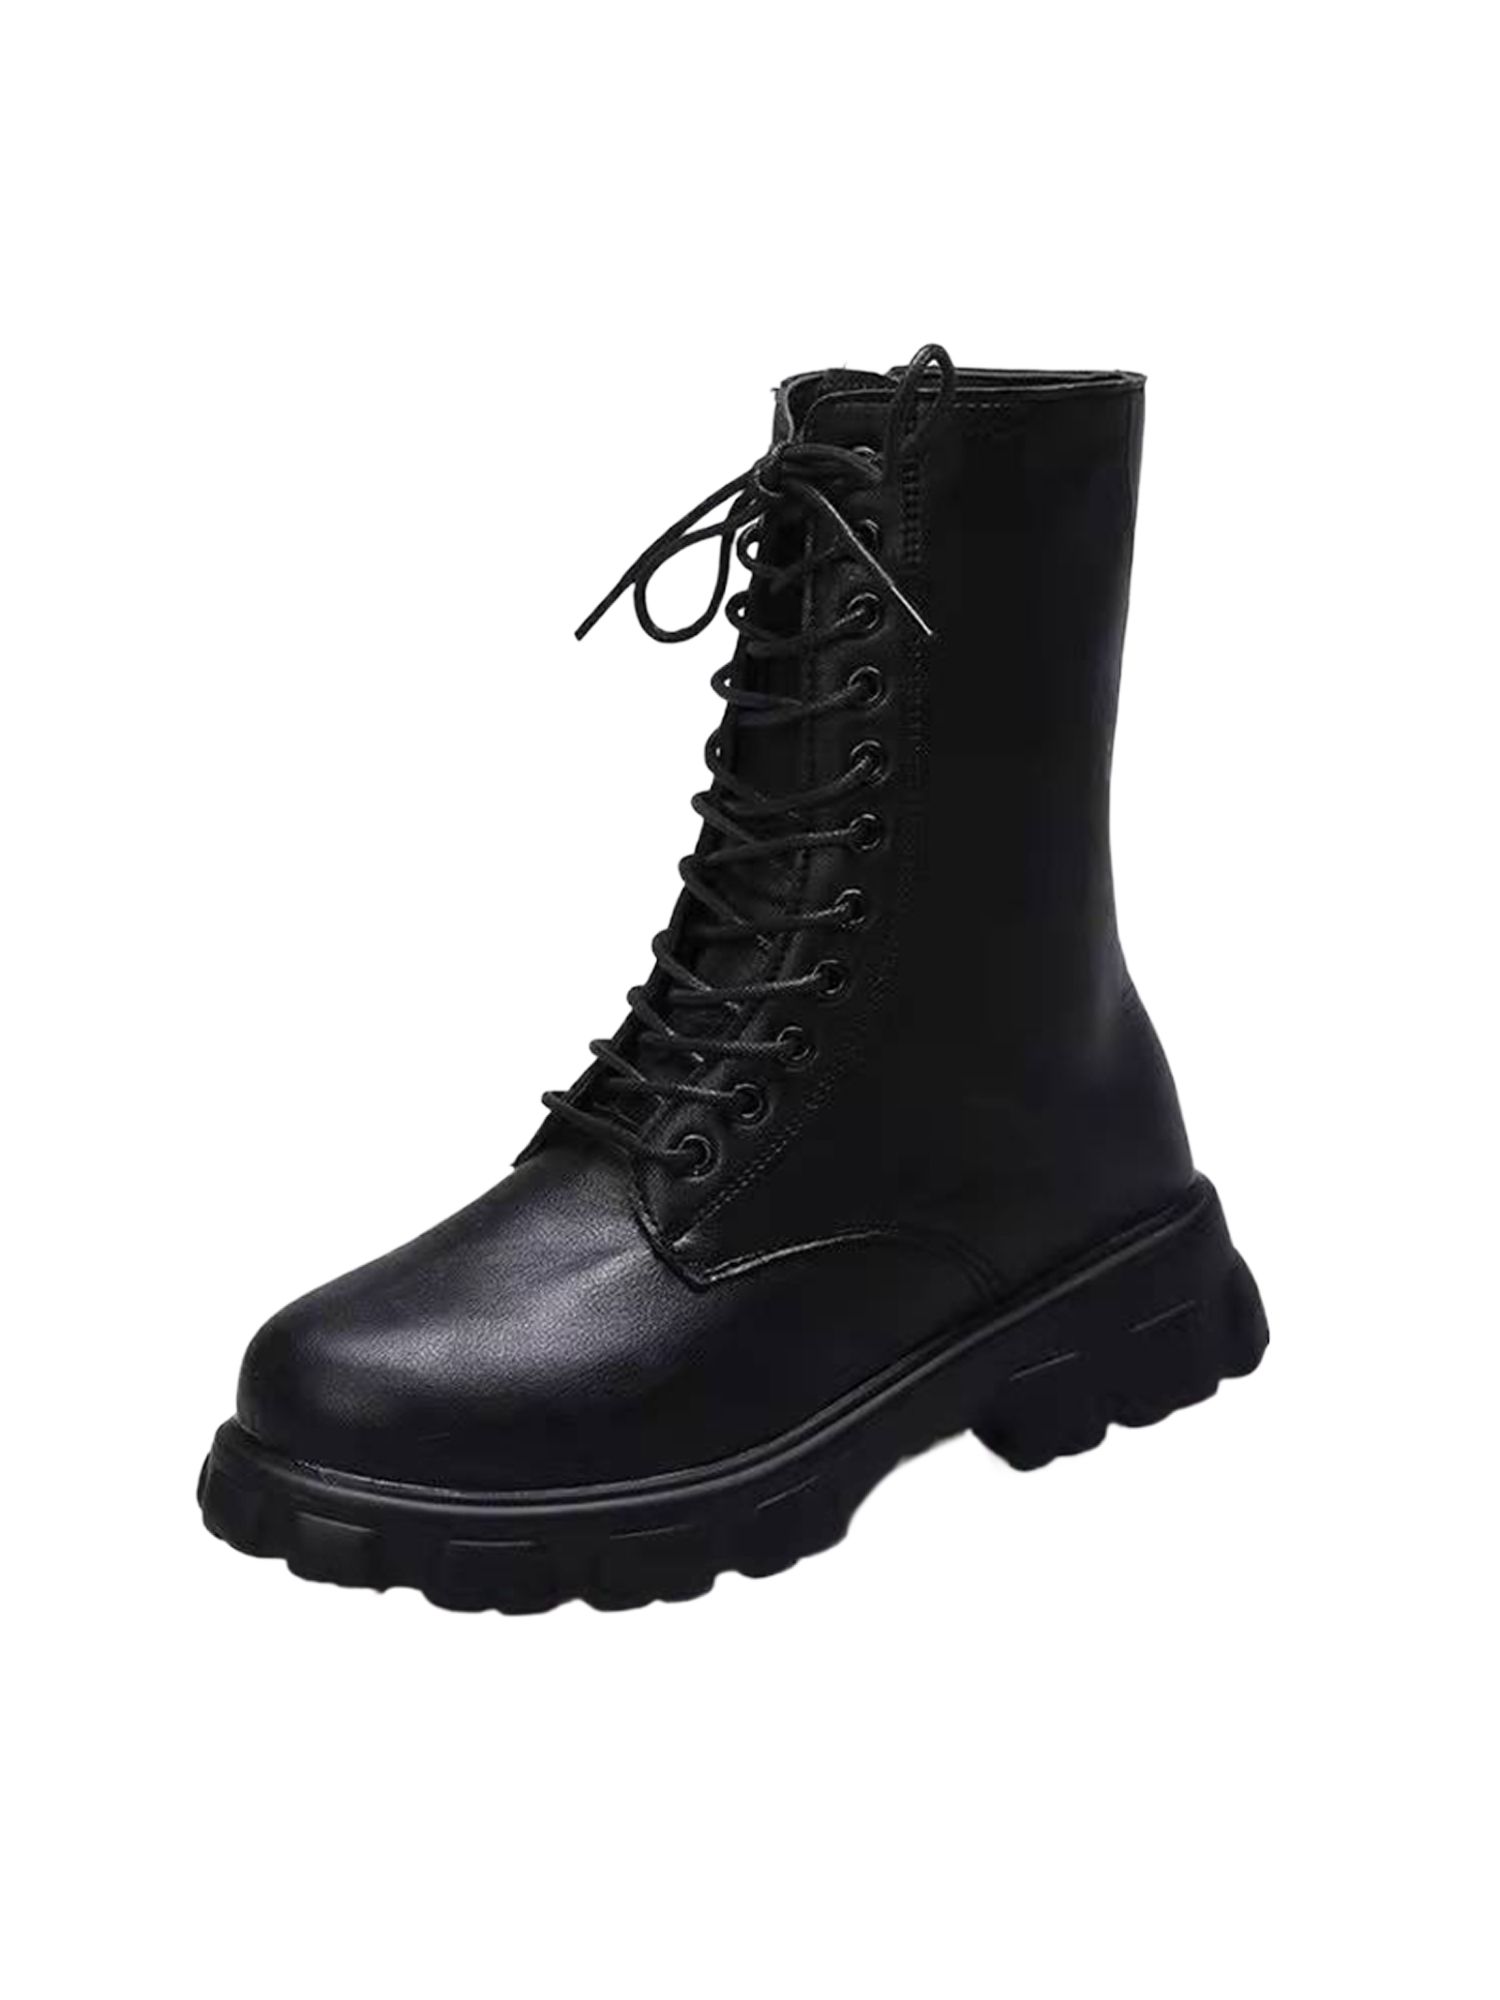 Gomelly Women Comfort Combat Boot Non-Slip Chunky Heel High Top Shoes Military Walking Fashion Lace Up Work Boots Black 8 - image 1 of 6